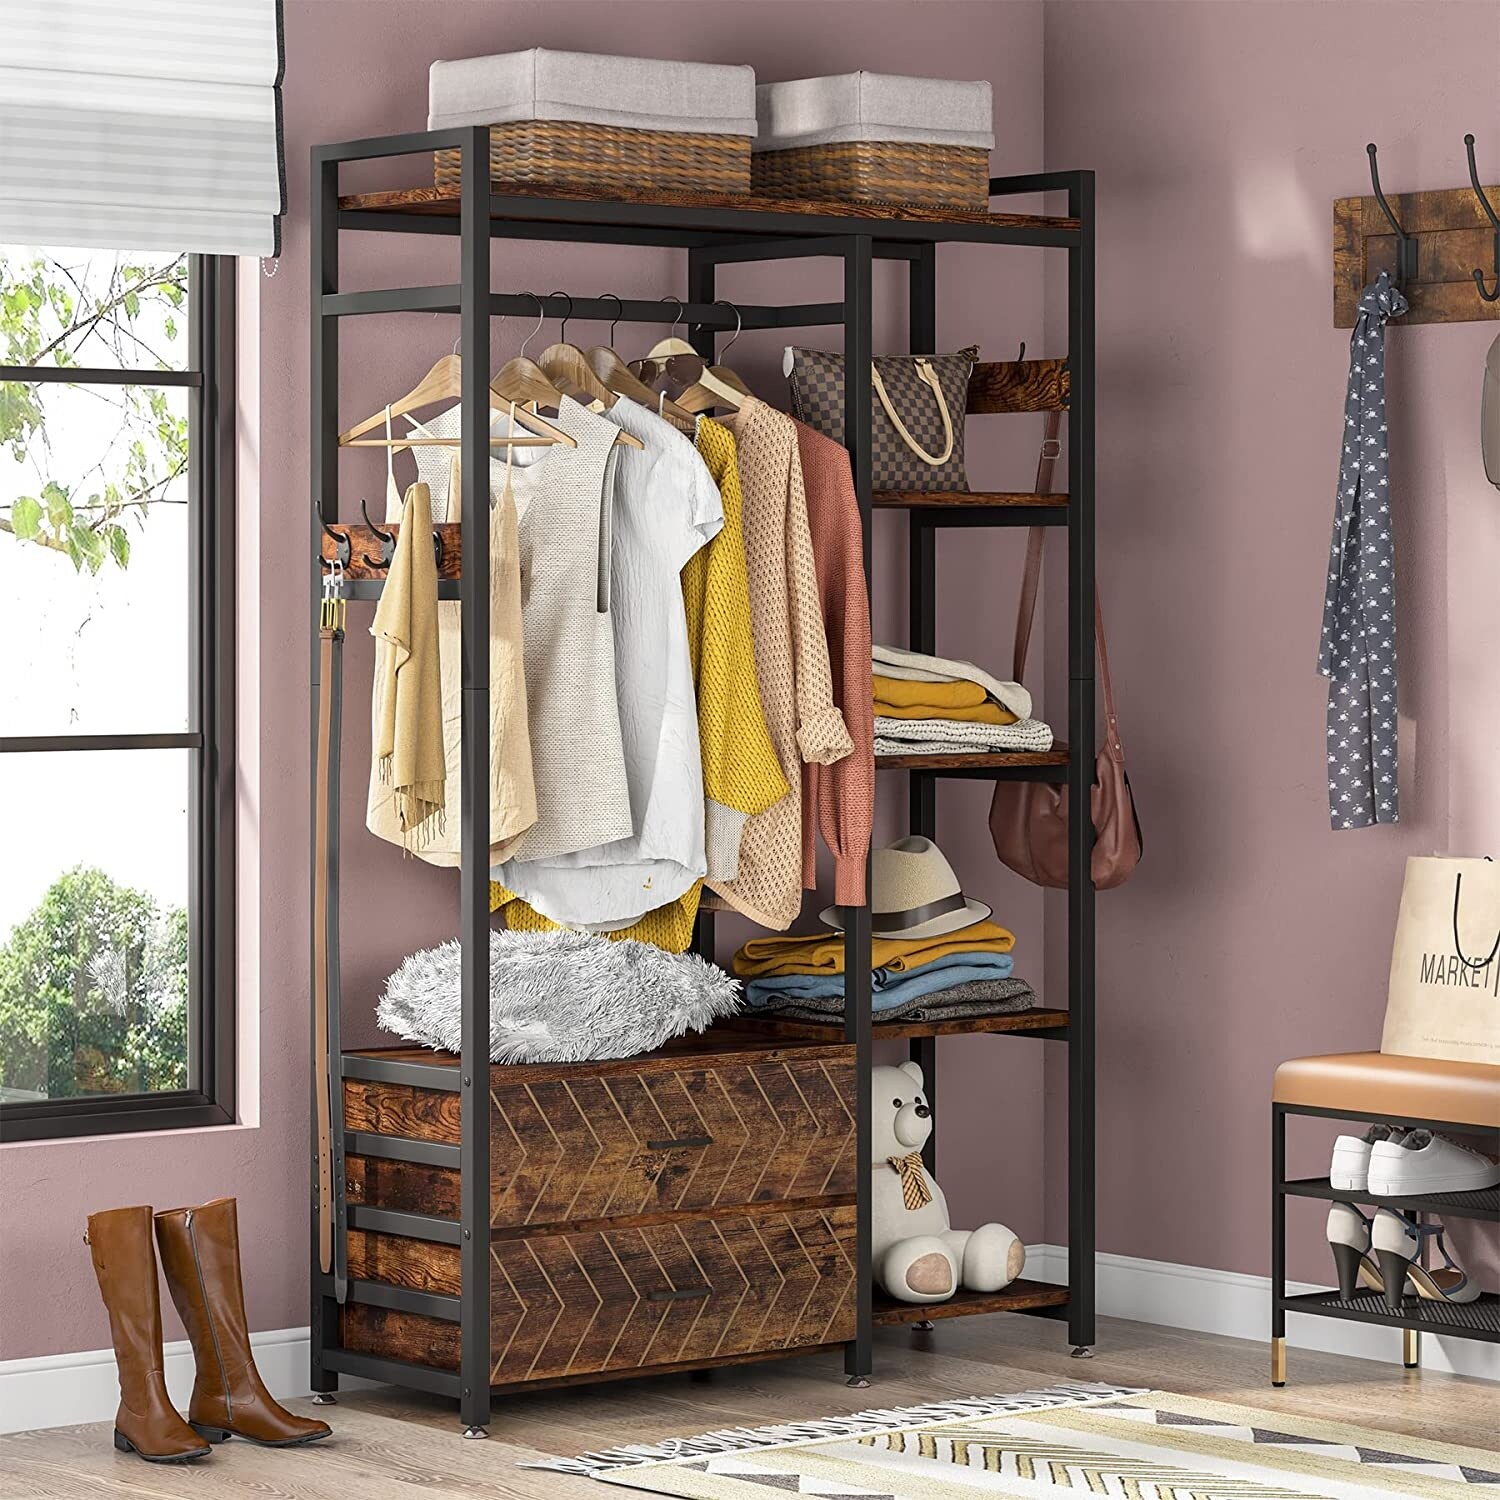 https://ak1.ostkcdn.com/images/products/is/images/direct/bd70bae6790889b2e5ca586c0b819d2d46bcb5e5/Freestanding-Closet-Organizer-with-2-Drawers%2C-Clothes-Shelf-Garment-Rack-with-Shelves-and-Hanging-Rod%2C-Clothing-Storage-Brown.jpg